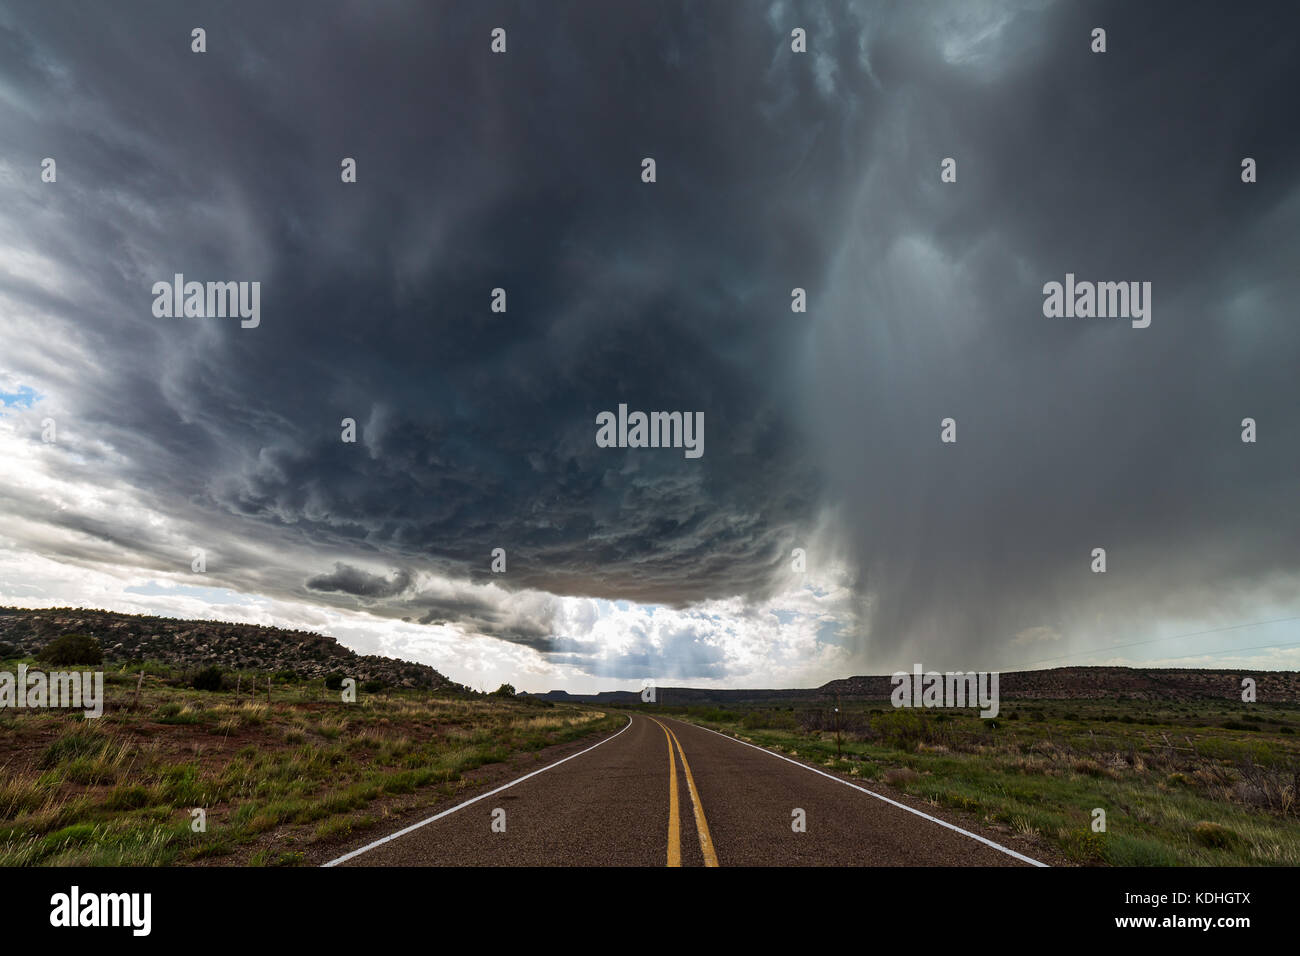 Supercell thunderstorm cloud and road near Tucumcari, New Mexico Stock Photo